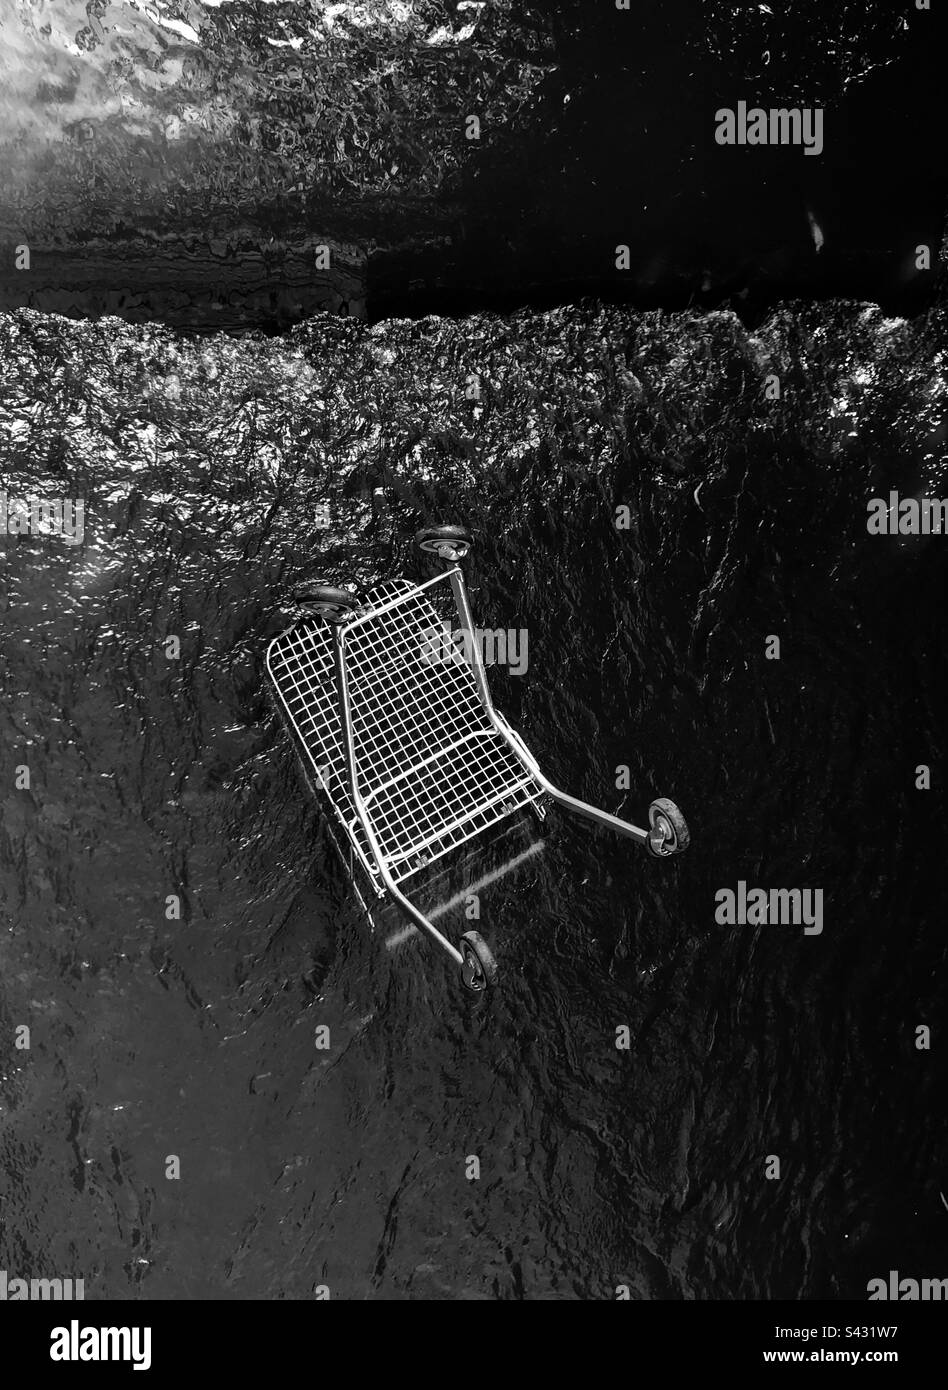 Shopping trolley thrown into a canal Stock Photo